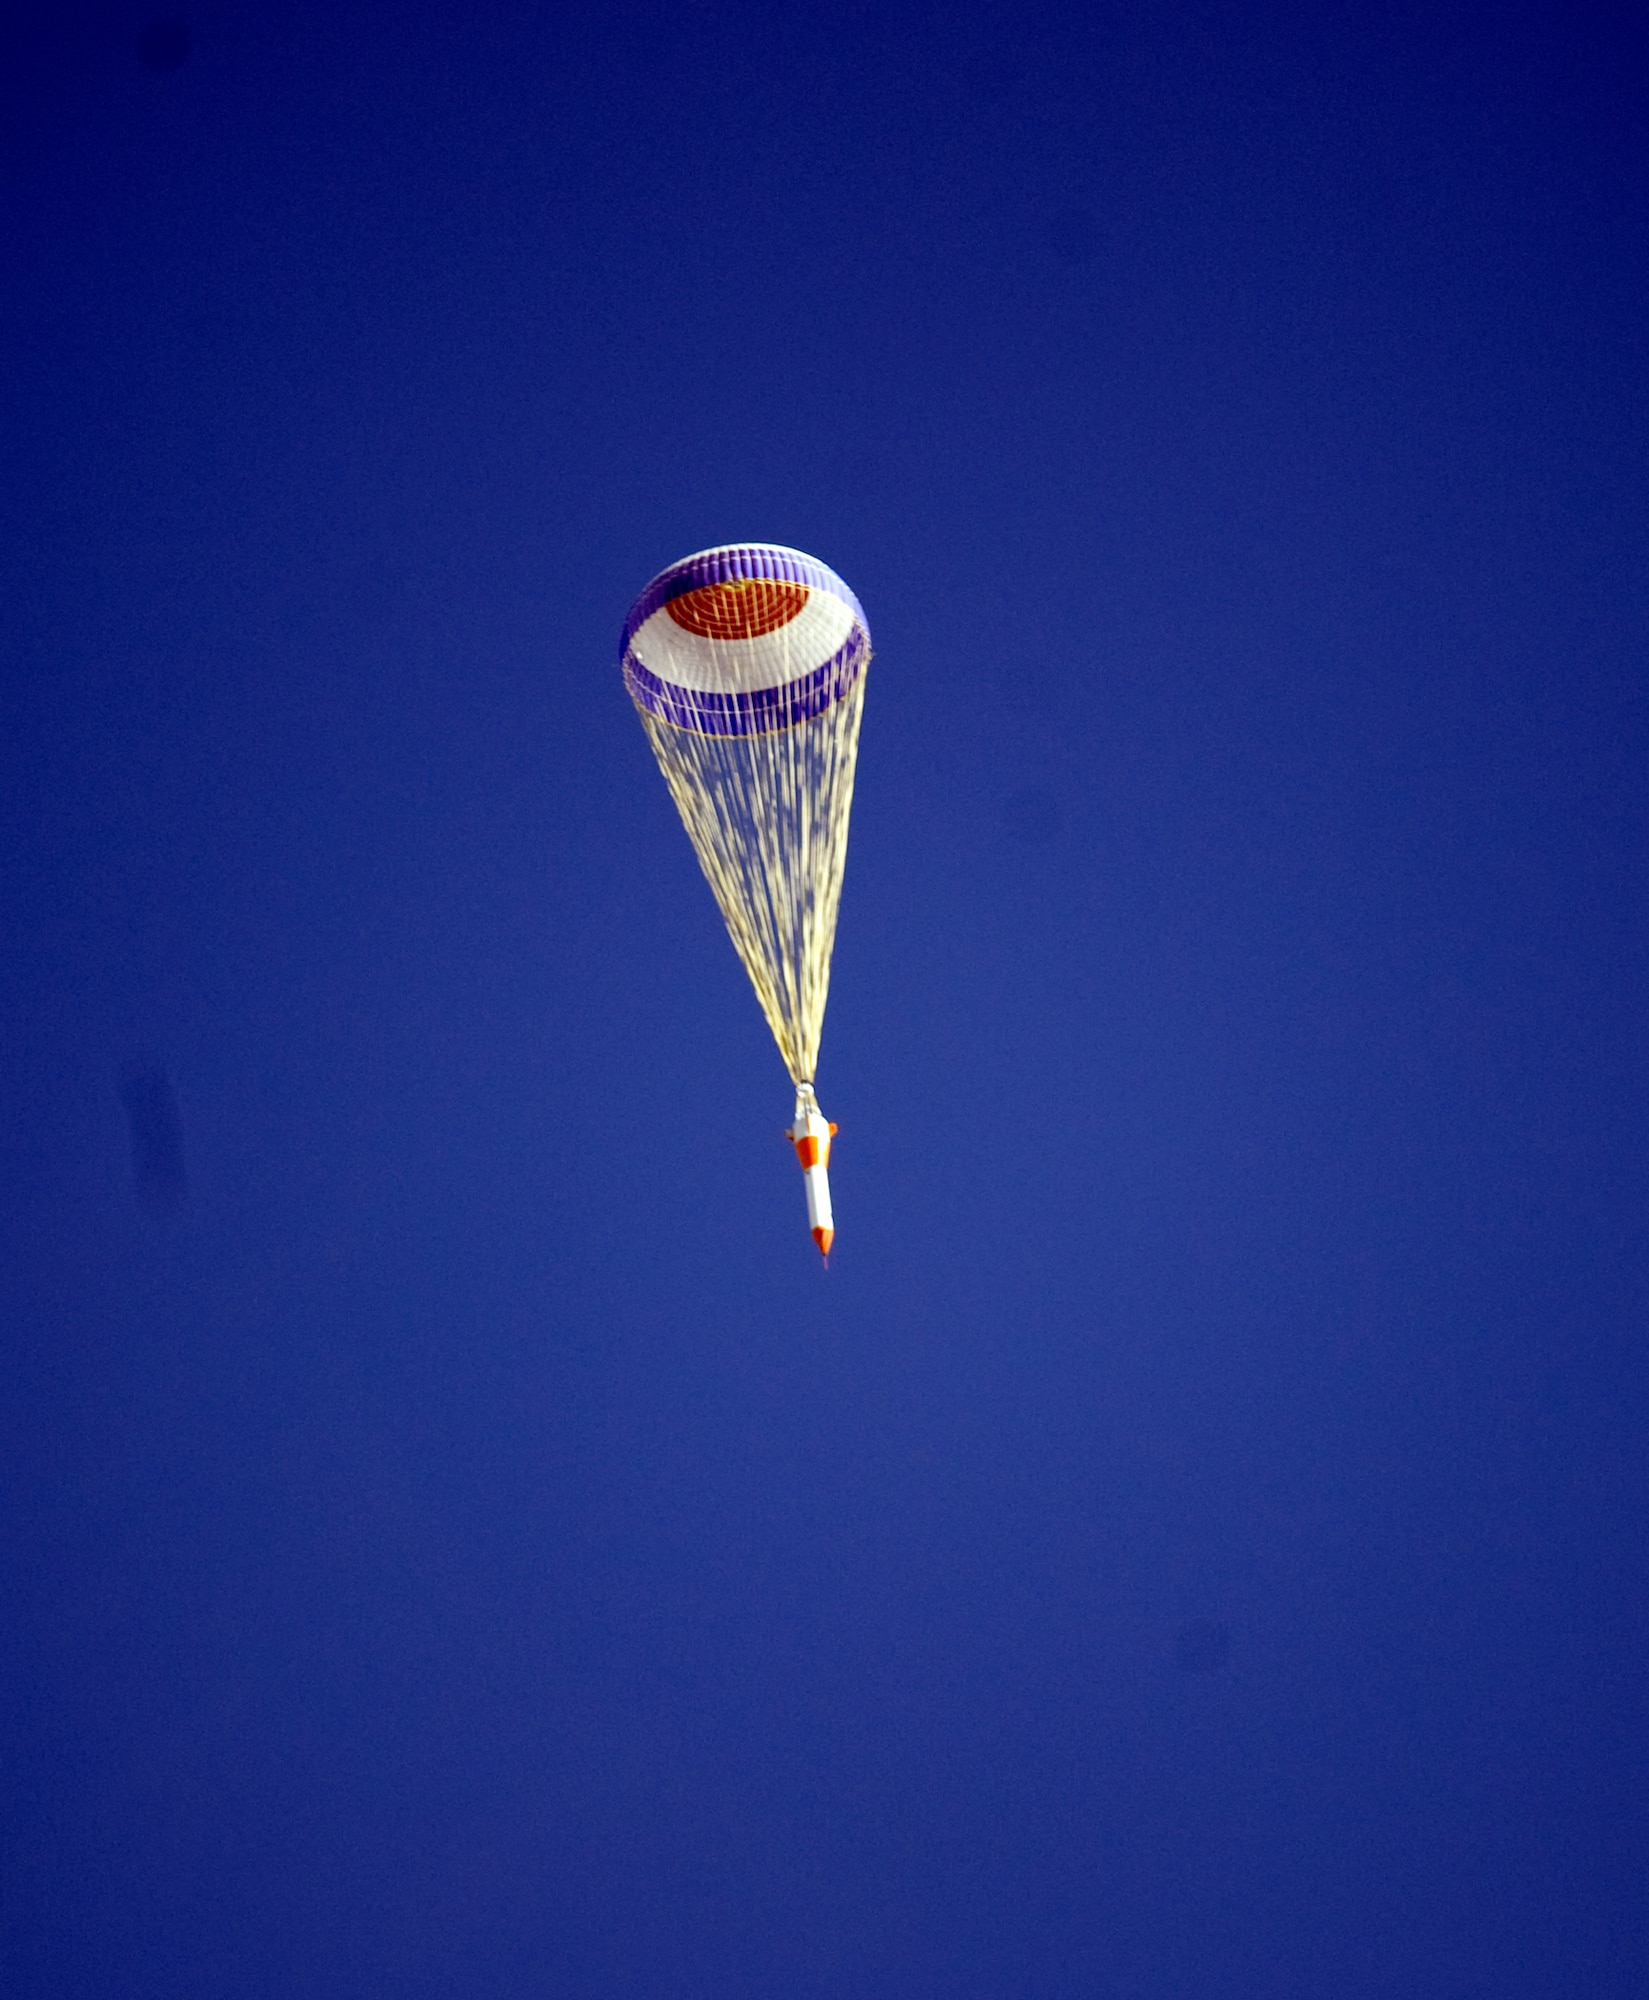 A 77,000 pound jumbo drop test vehicle descends from 25,000 feet April 14, 2010, over Yuma Proving Ground, Ariz. (Courtesy of NASA)